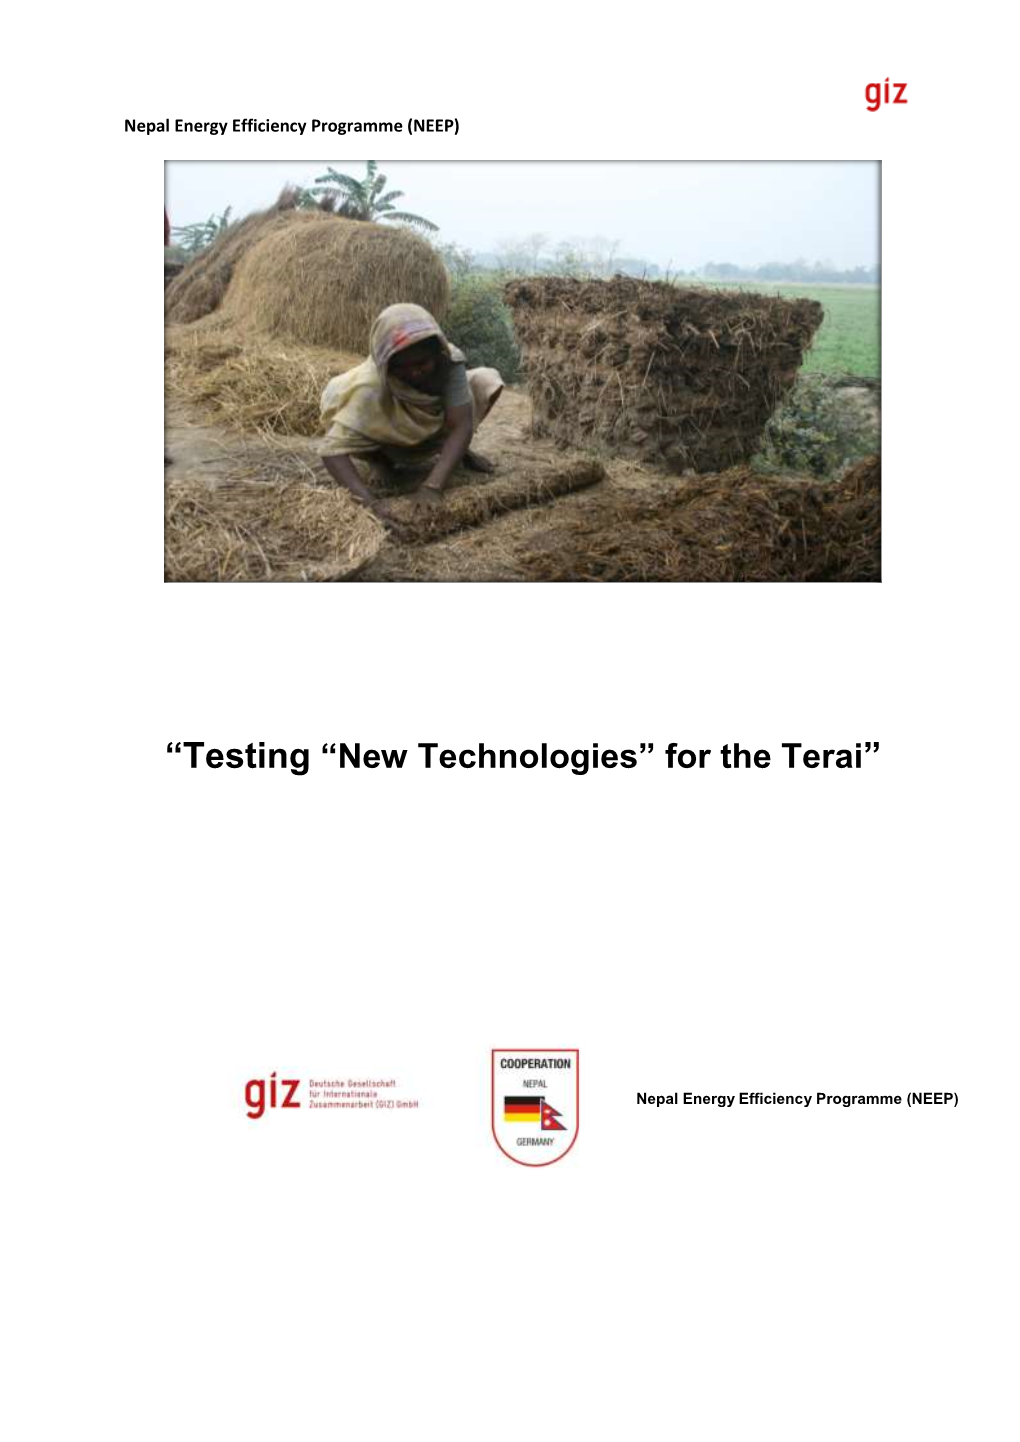 New Technologies” for the Terai”